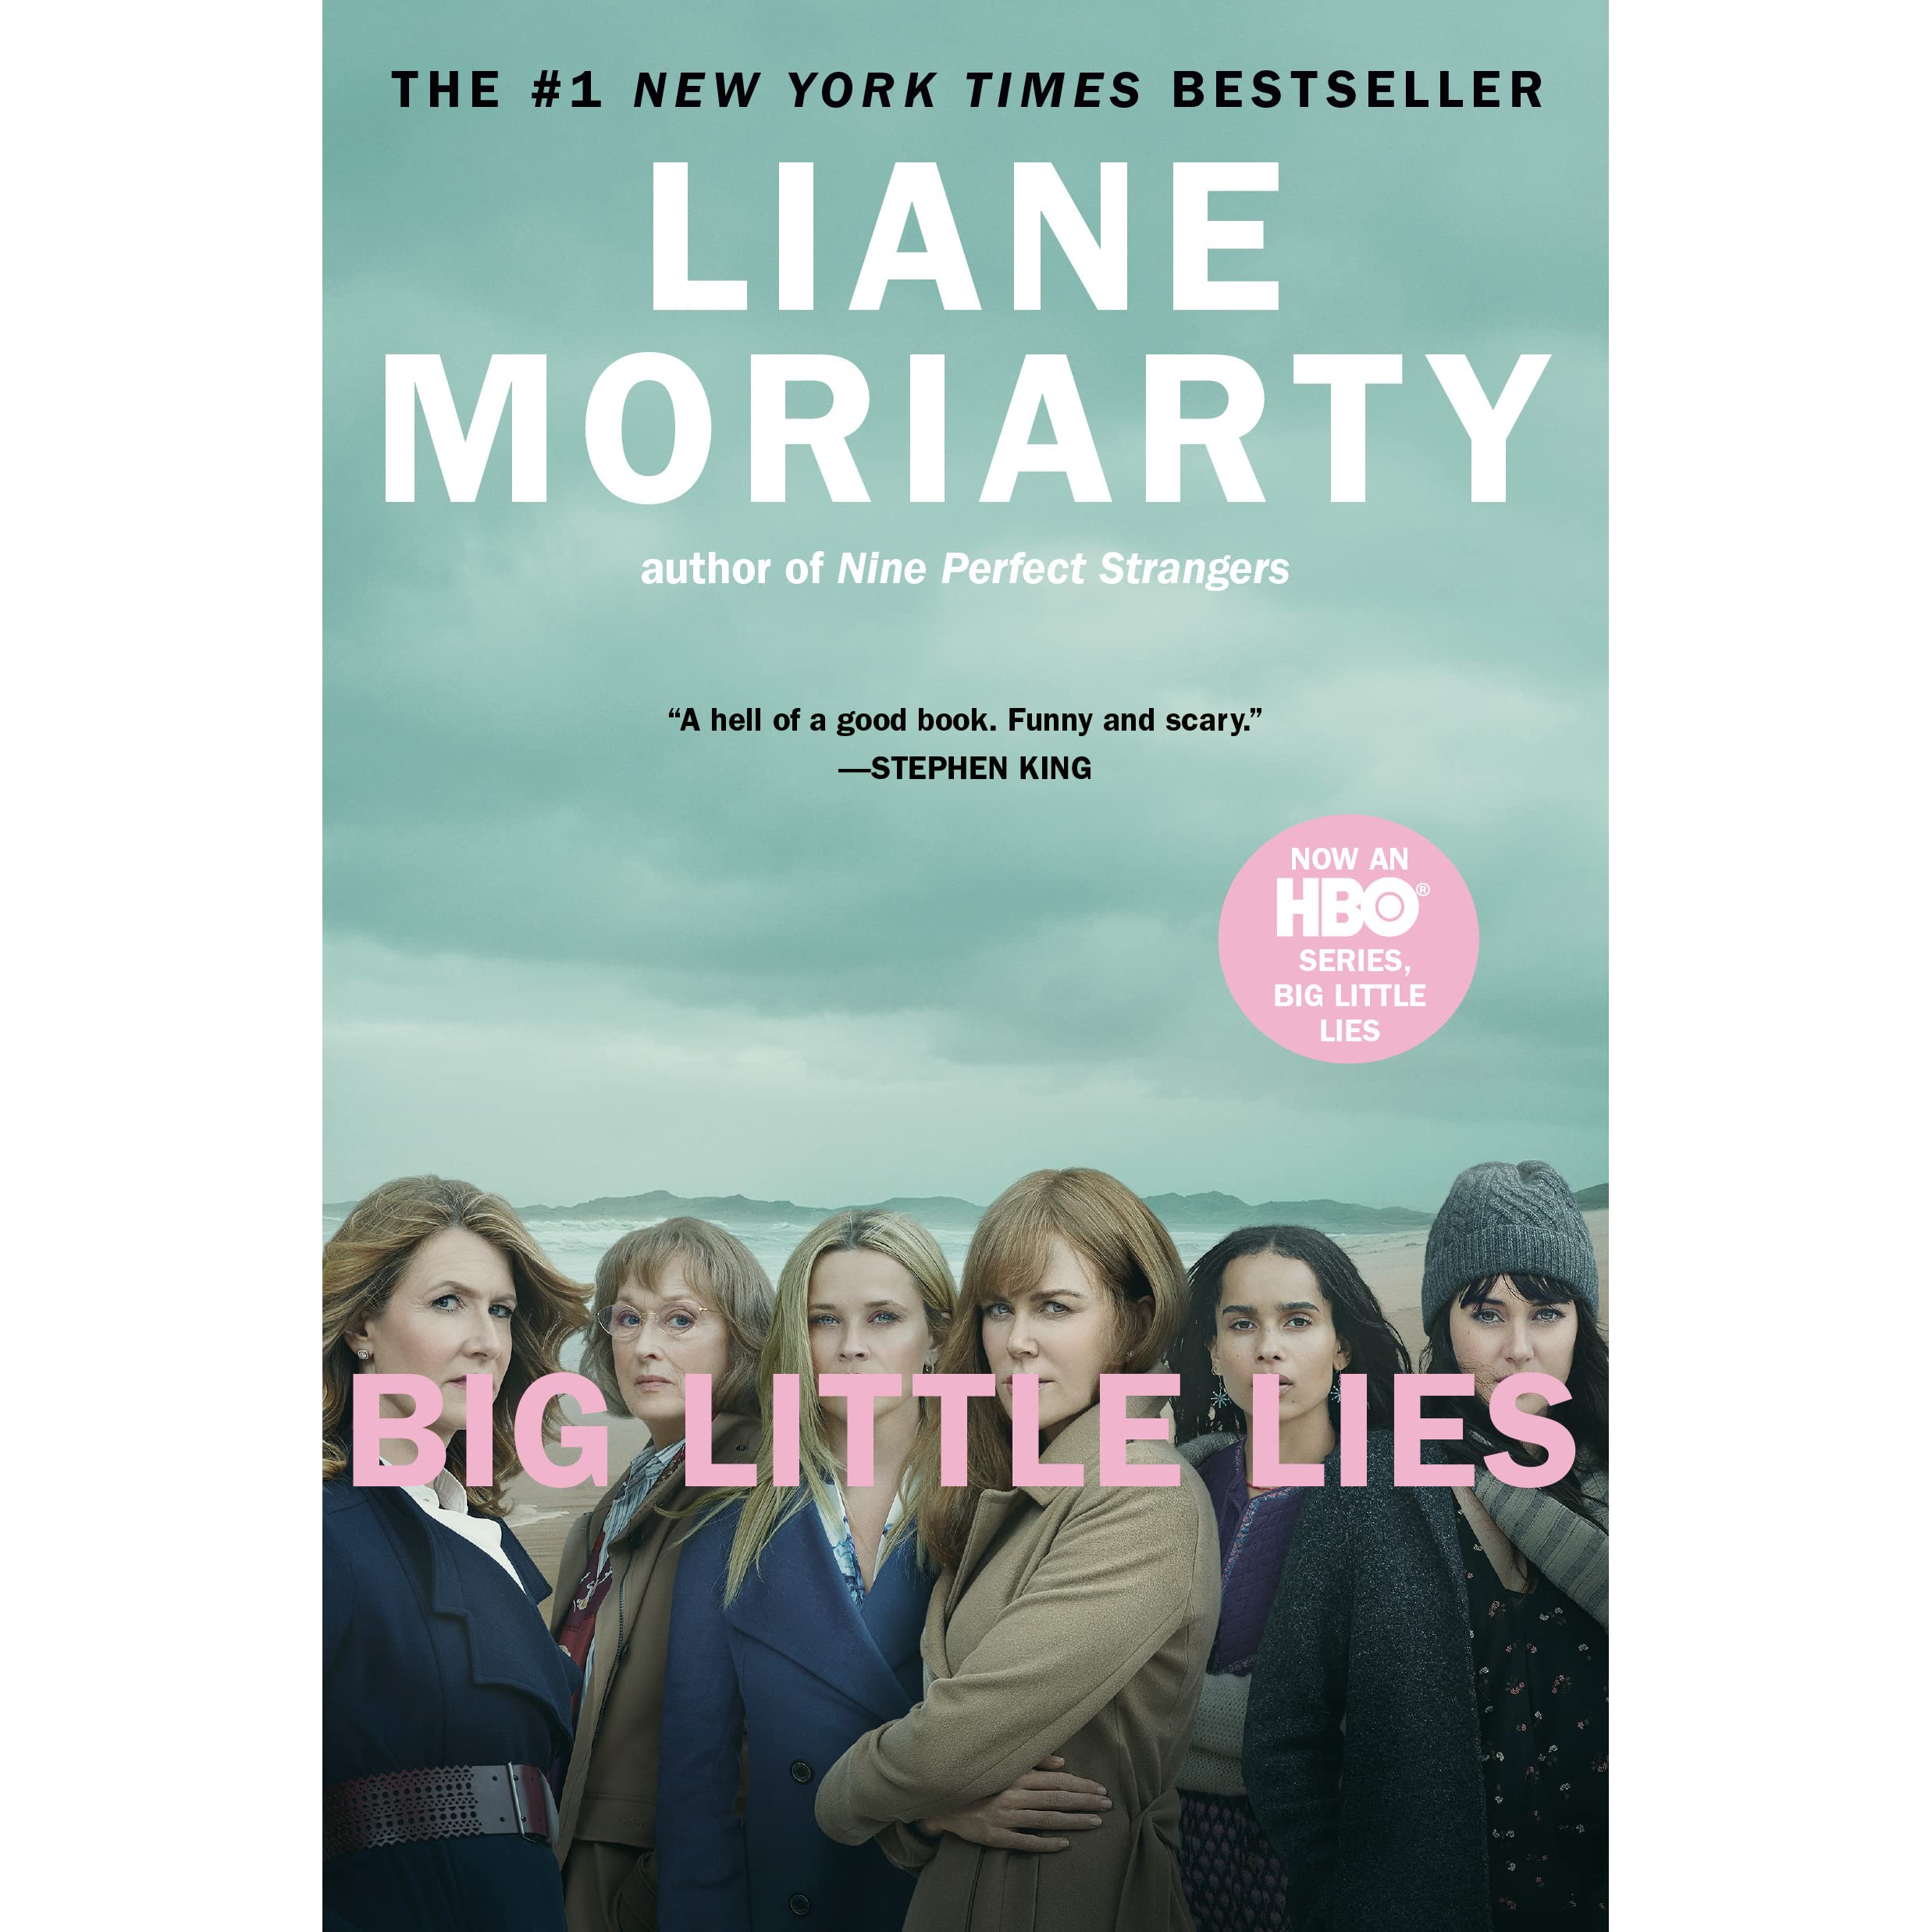 Frontlist | 'Big Little Lies' author Liane Moriarty's upcoming novel